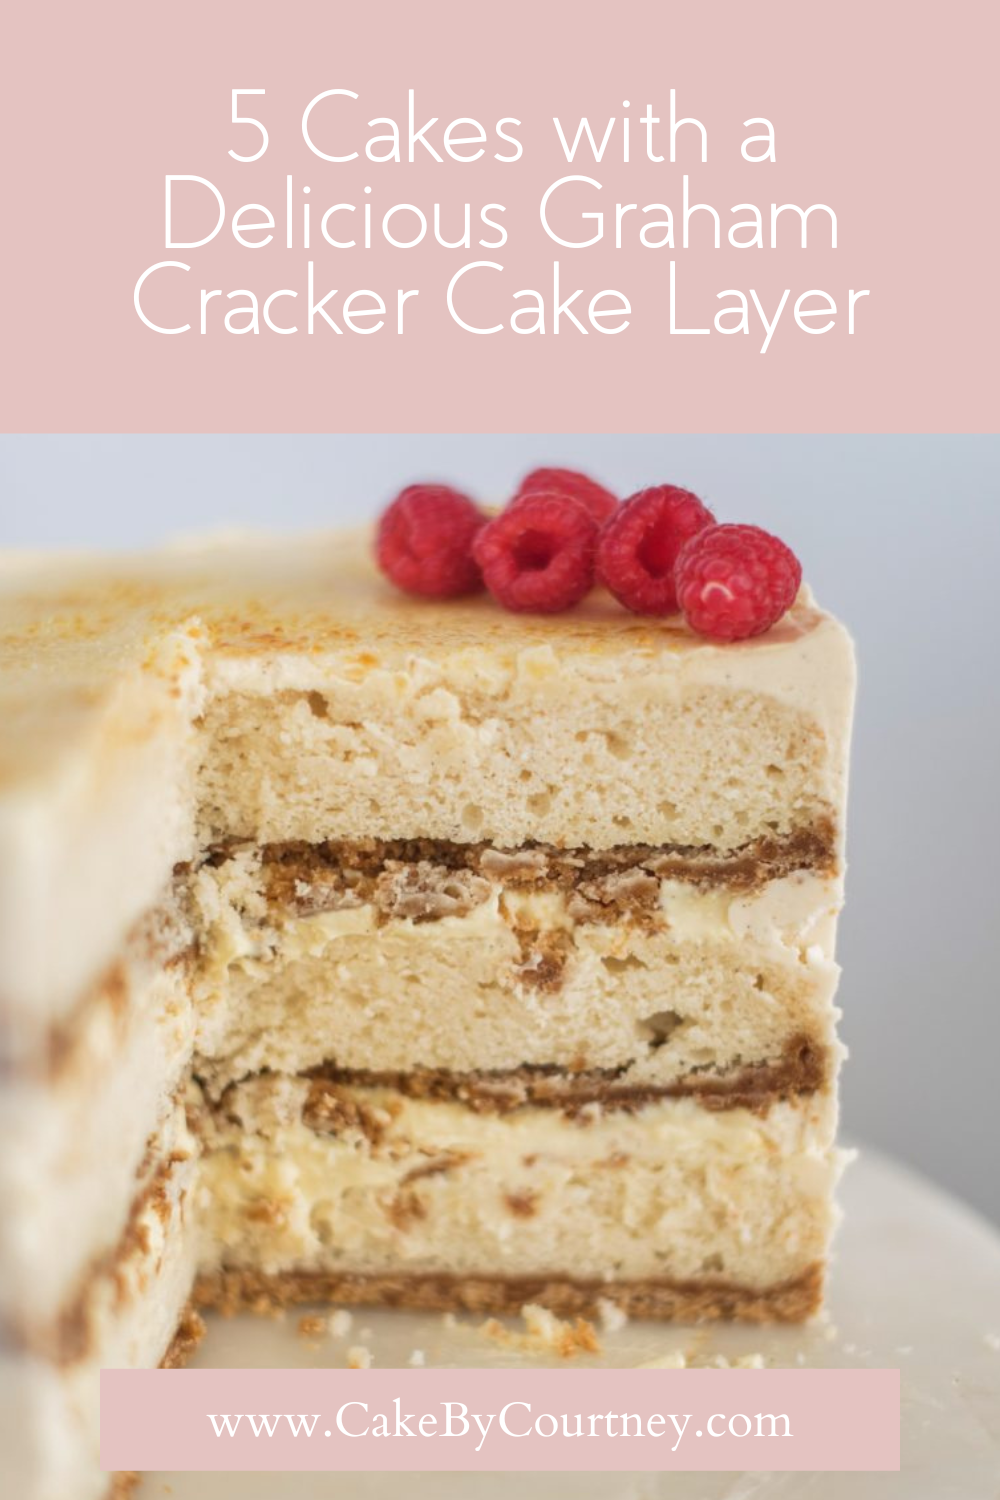 5 cakes with a delicious graham cracker cake layer. www.cakebycourtney.com